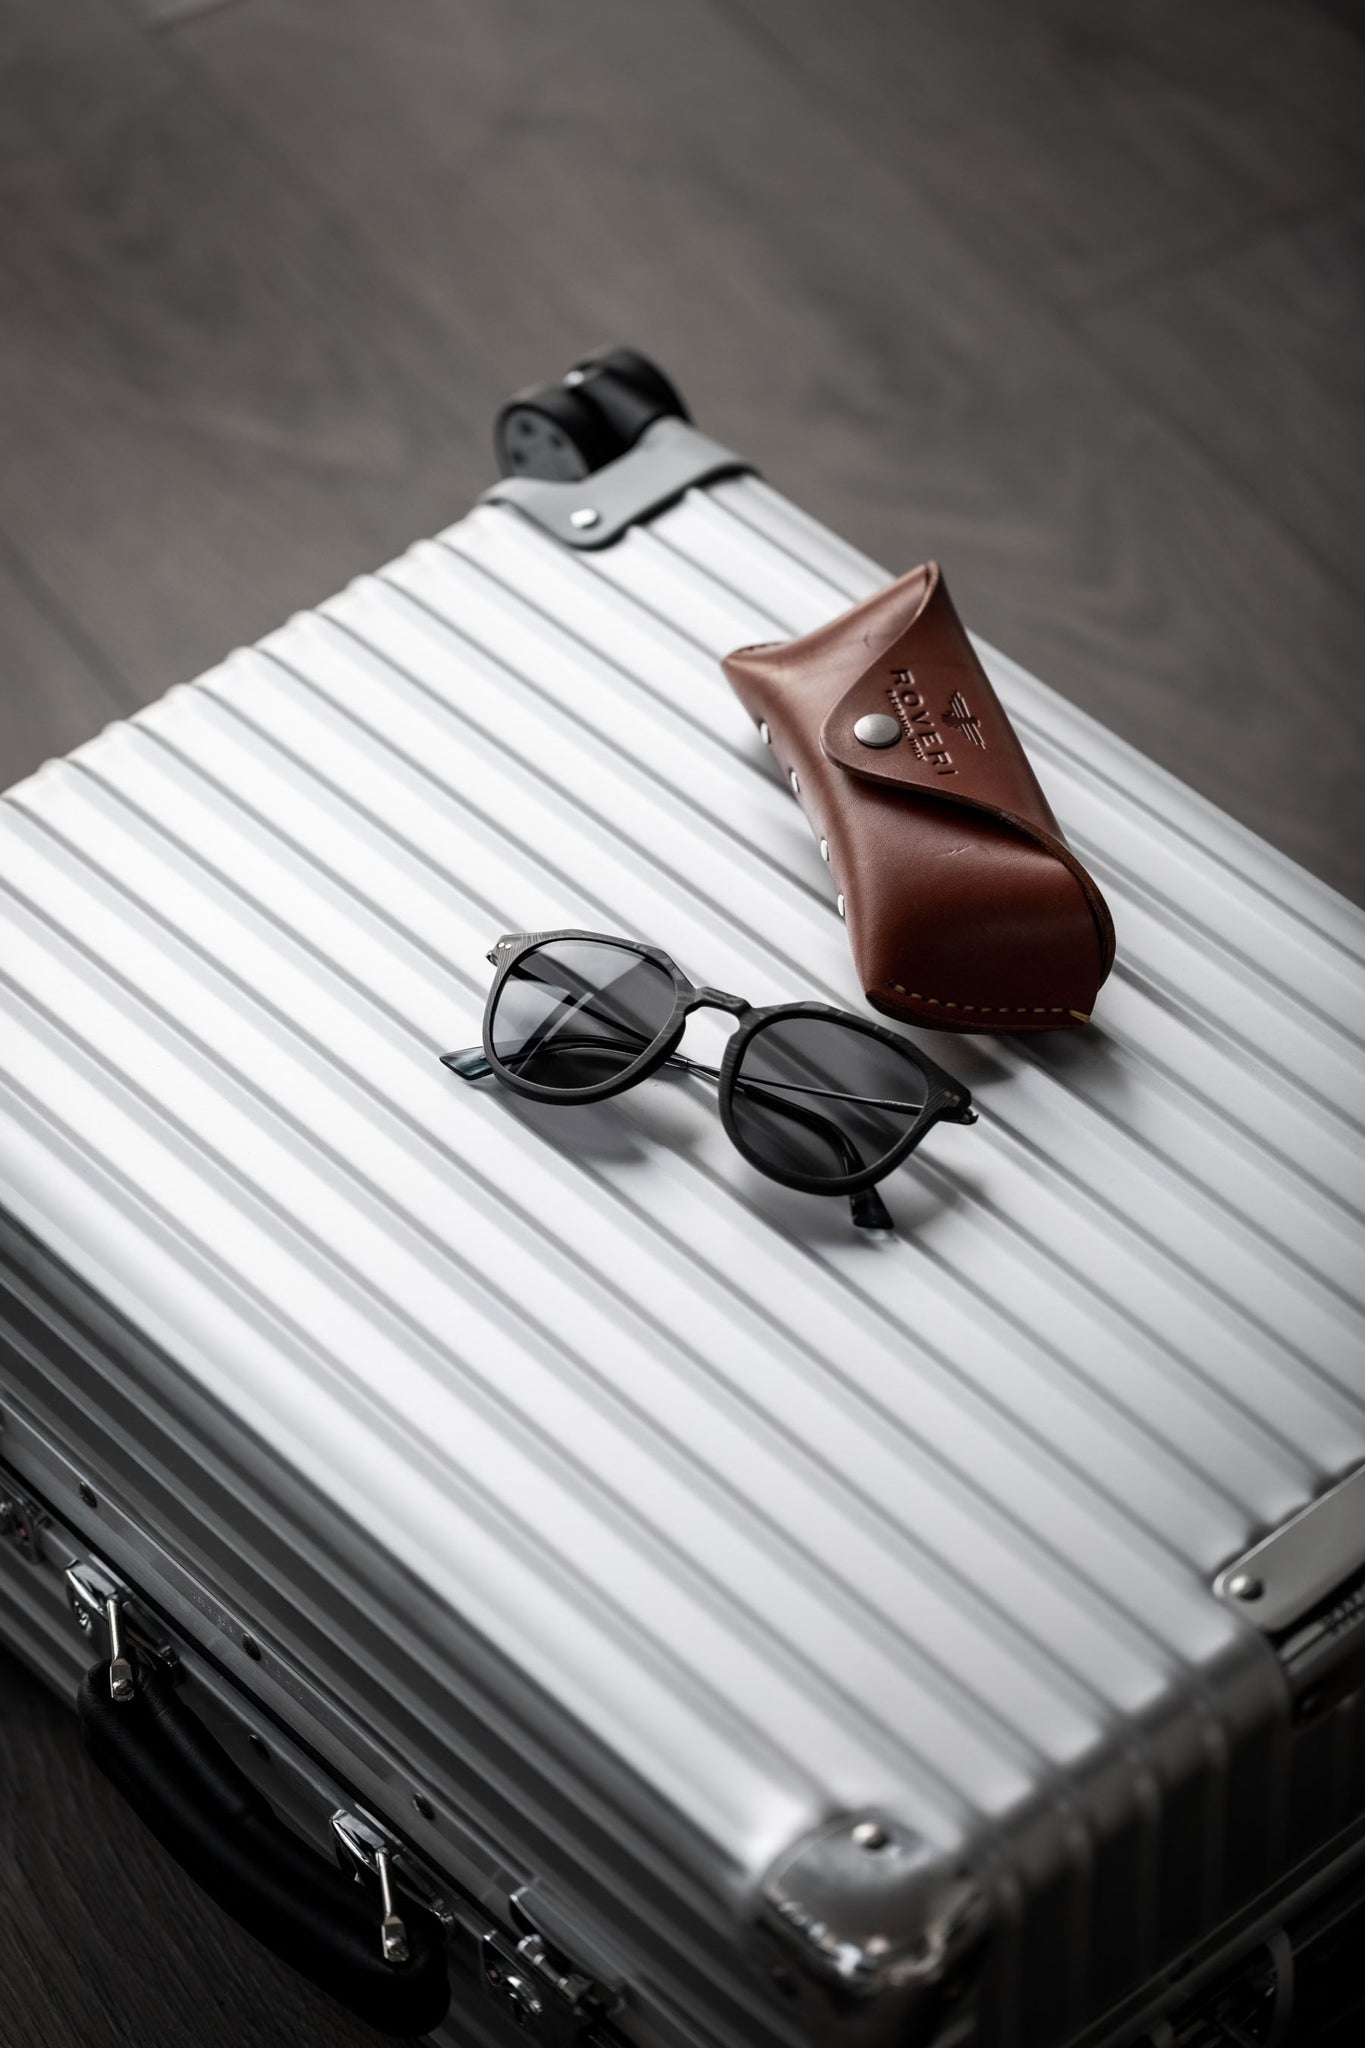 Roveri Eyewear clm7 black on black x Rimowa classic cabin suitcase paired with premium handmade leather case.